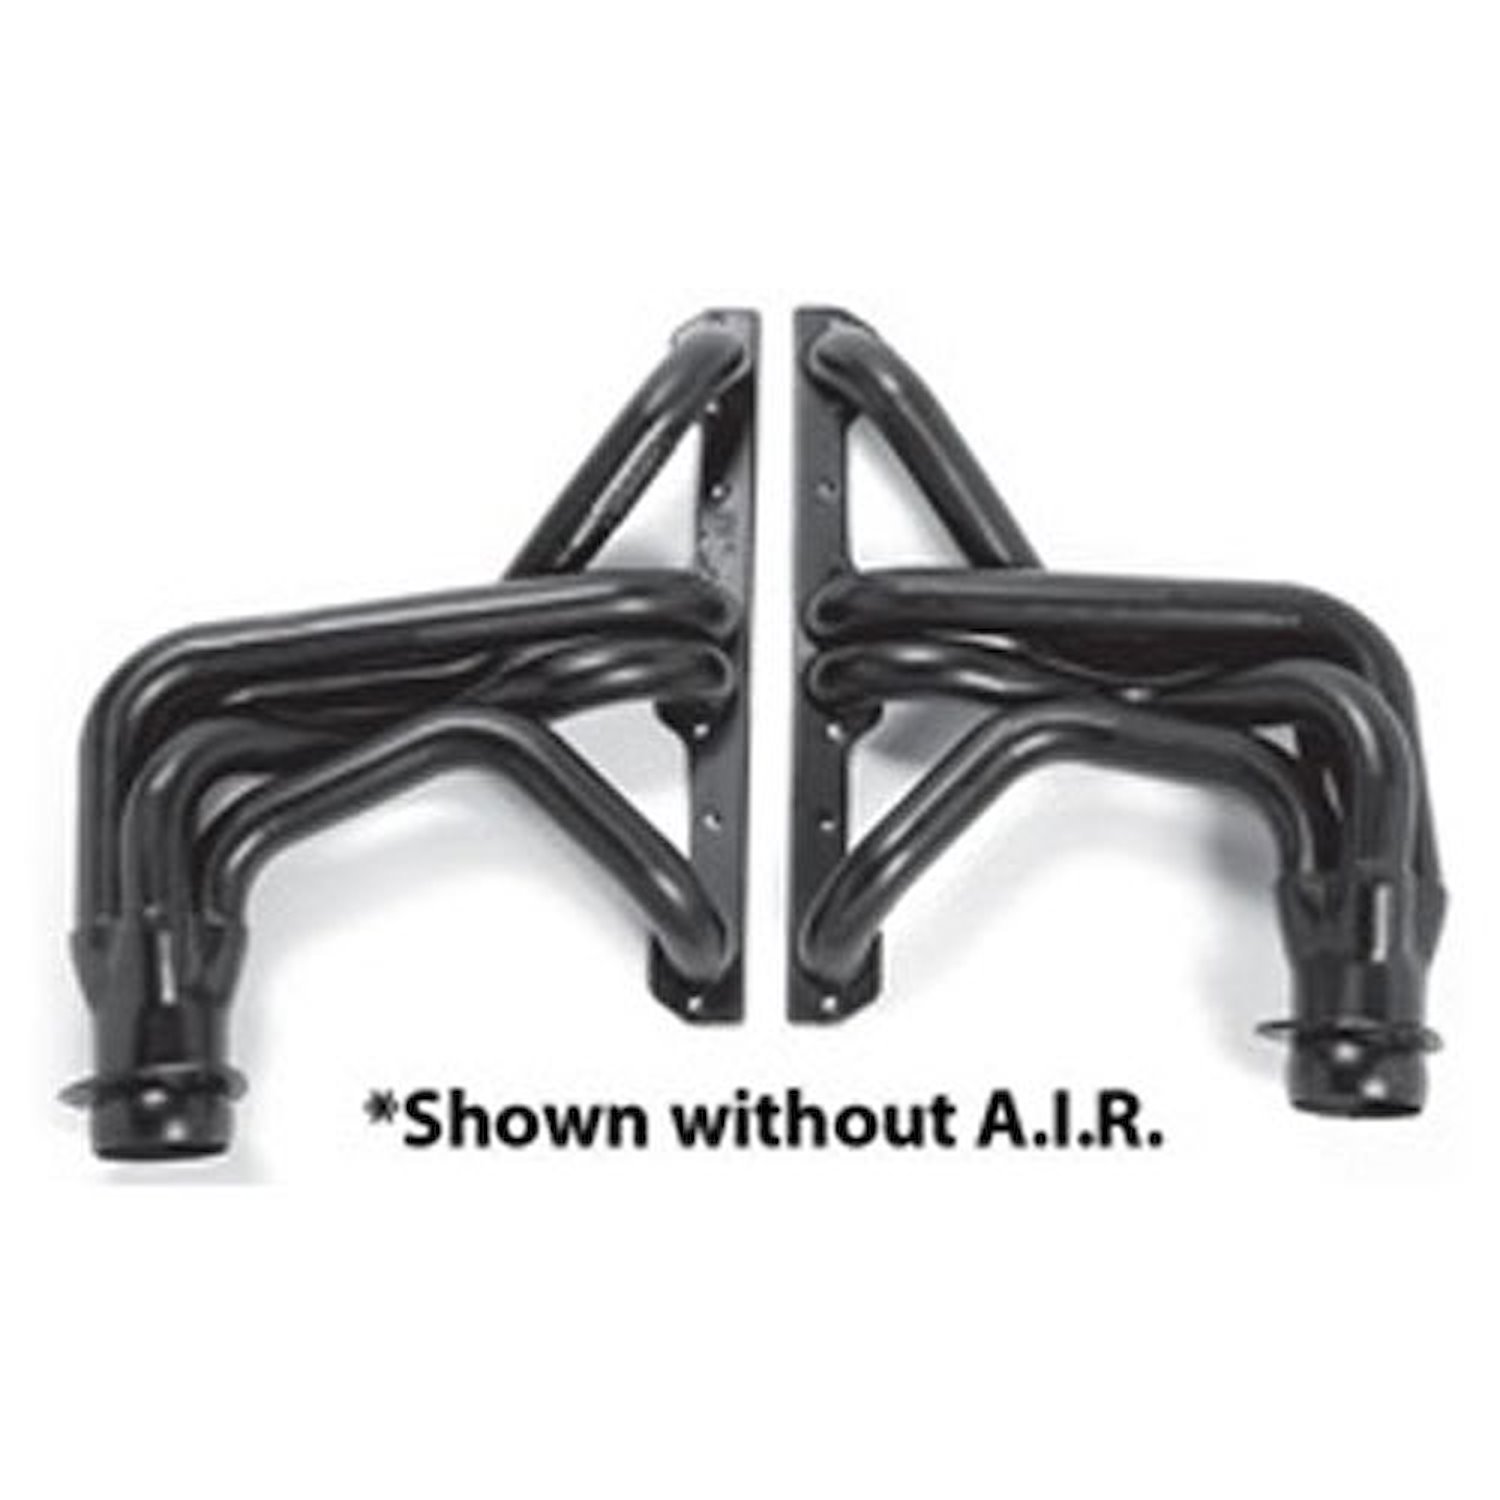 Standard Duty Uncoated Full Length Headers for 1967-81 Blazer, Jimmy, Pickup, Suburban 4WD Tube Size: 1-5/8"